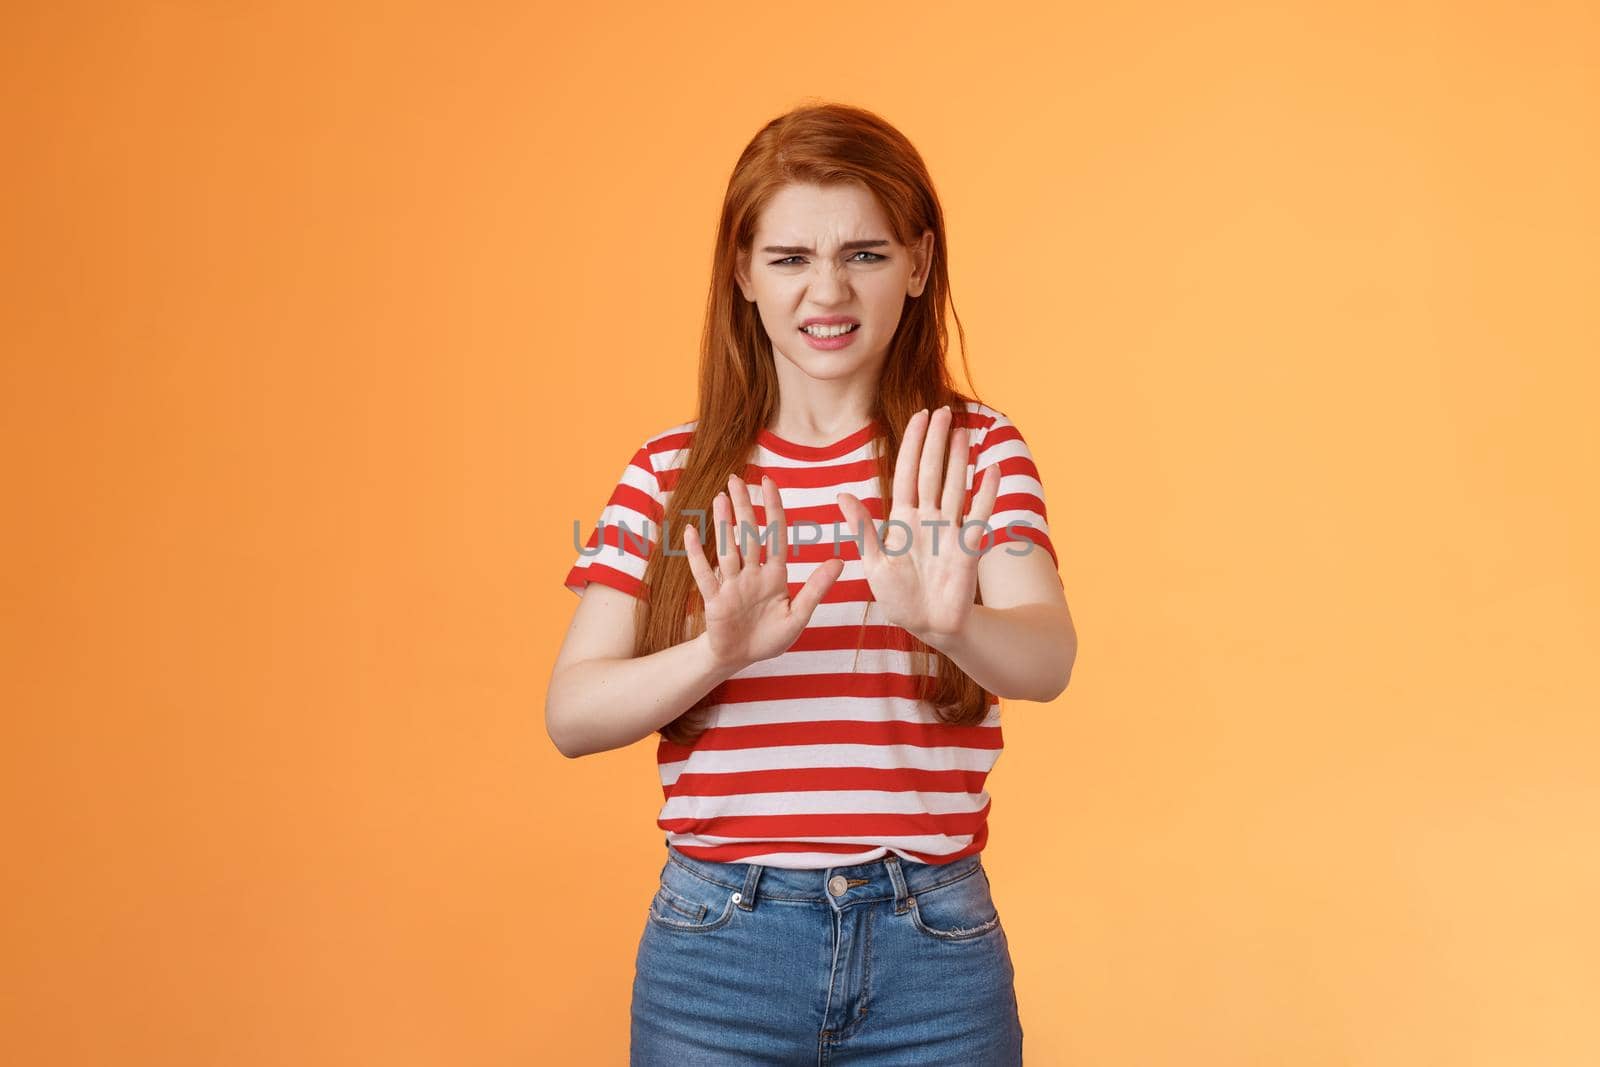 Gosh it stinks. Disgusted redhead picky woman blocking sign raise hands up defensive, grimacing, cringe from aversion awful smell, show refusal rejecting disgusting offer, stand orange background by Benzoix